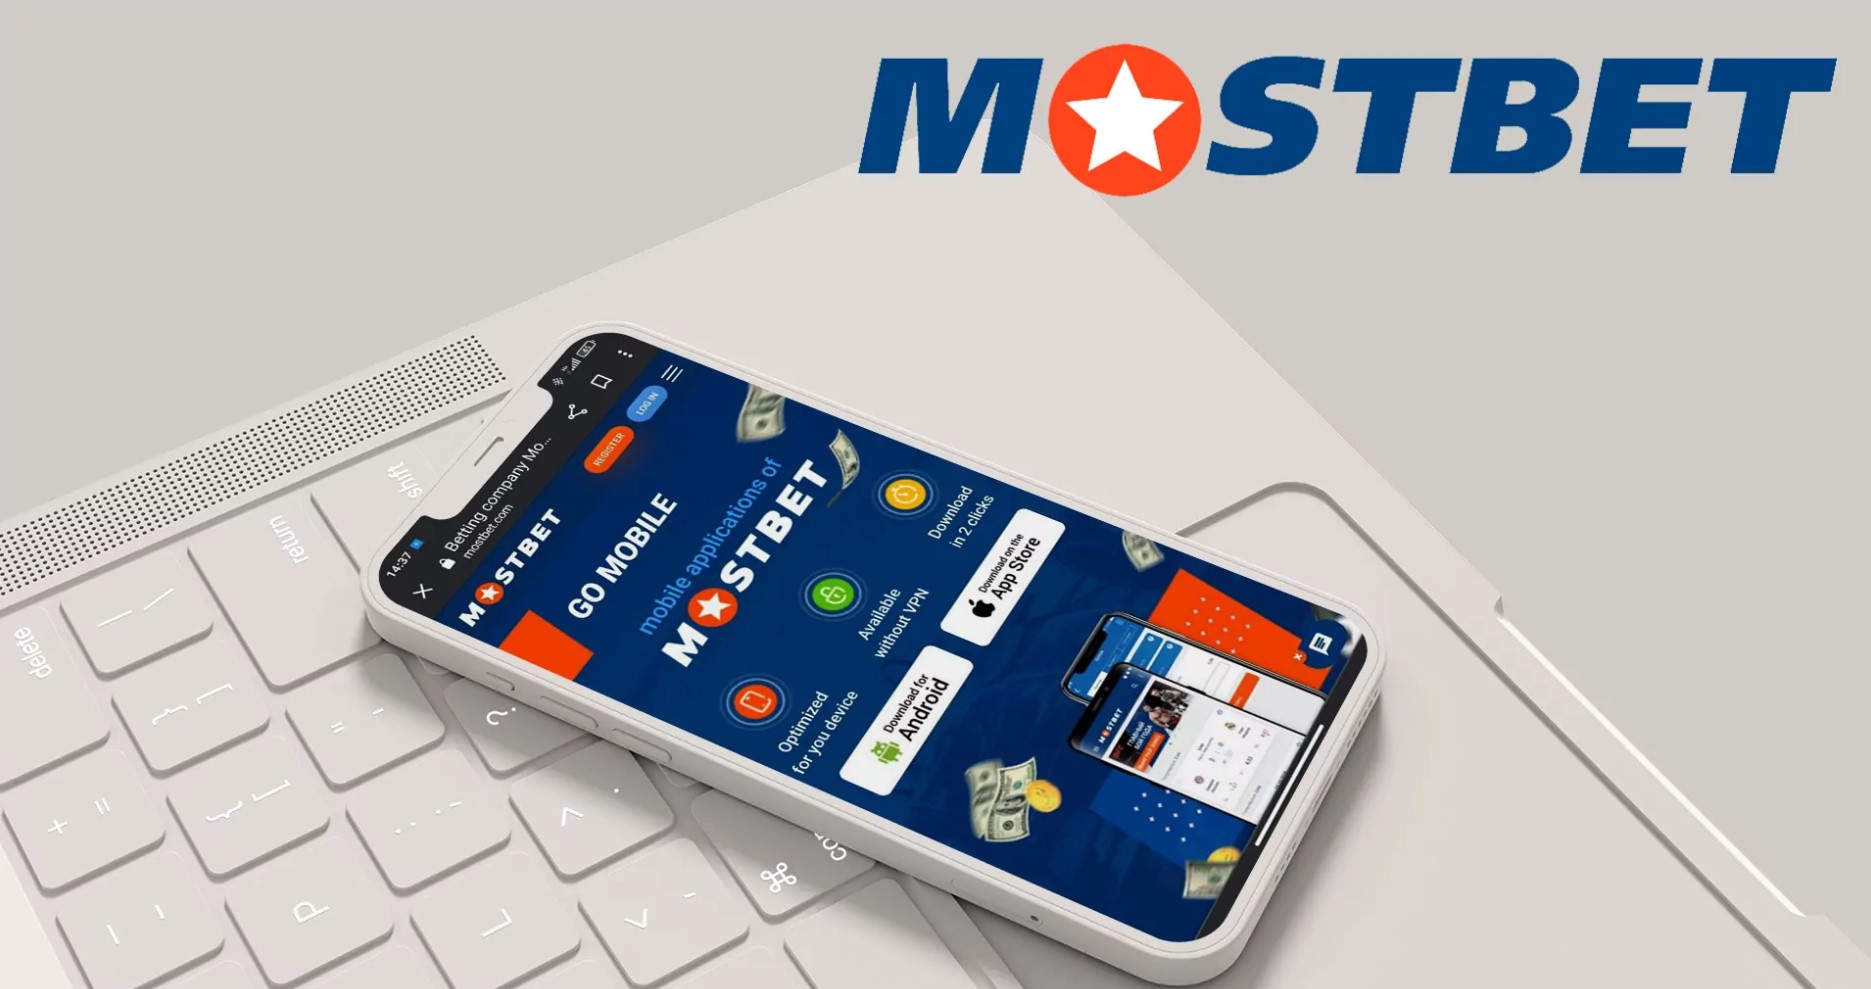 Being A Star In Your Industry Is A Matter Of Mostbet bookmaker and online casino in Azerbaijan